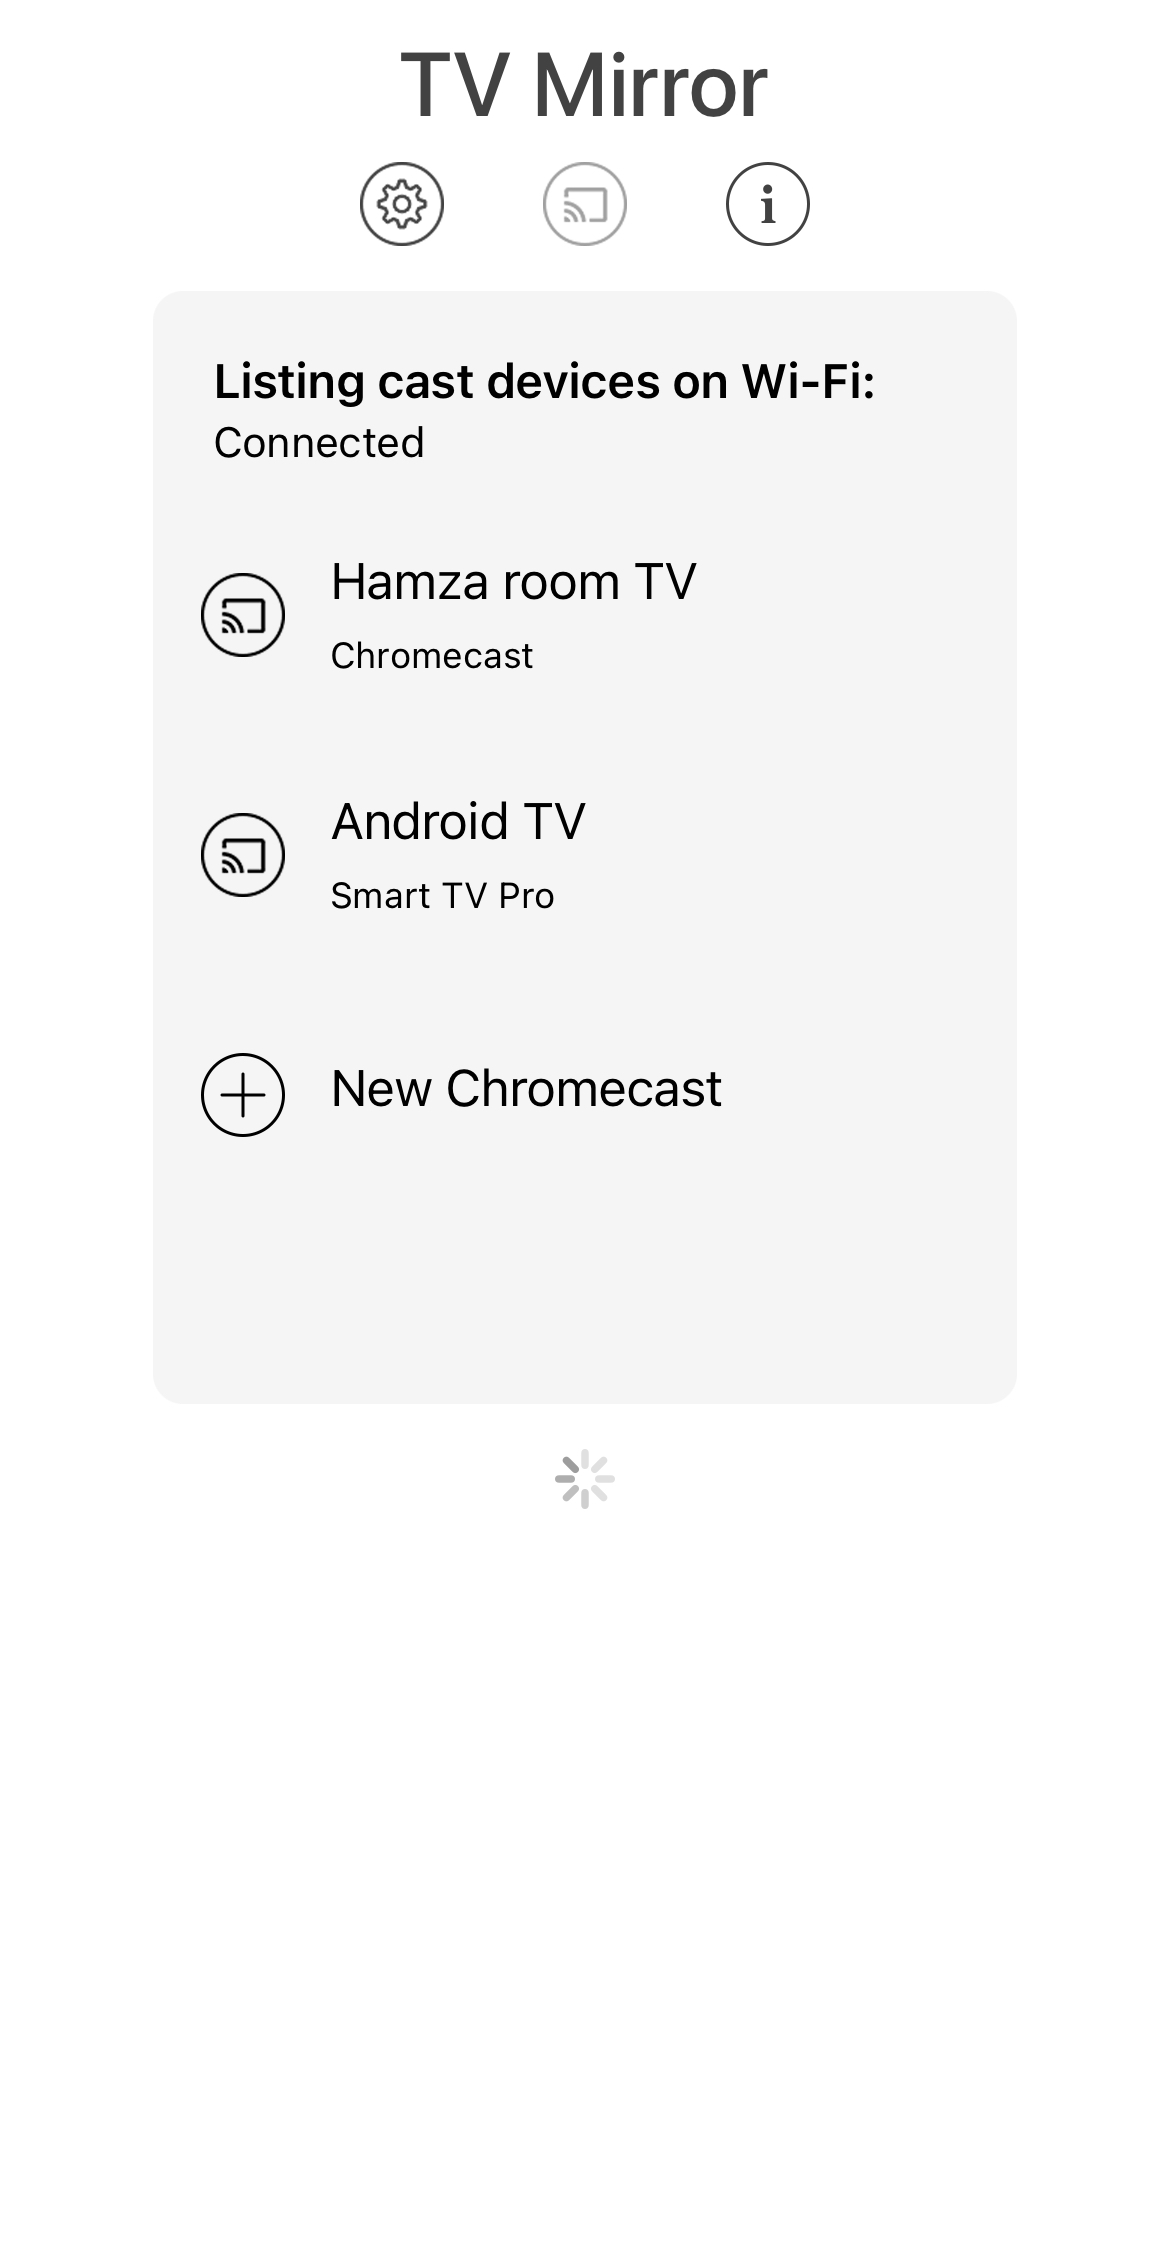 Connecting to a Chromecast device on a TV Mirror+